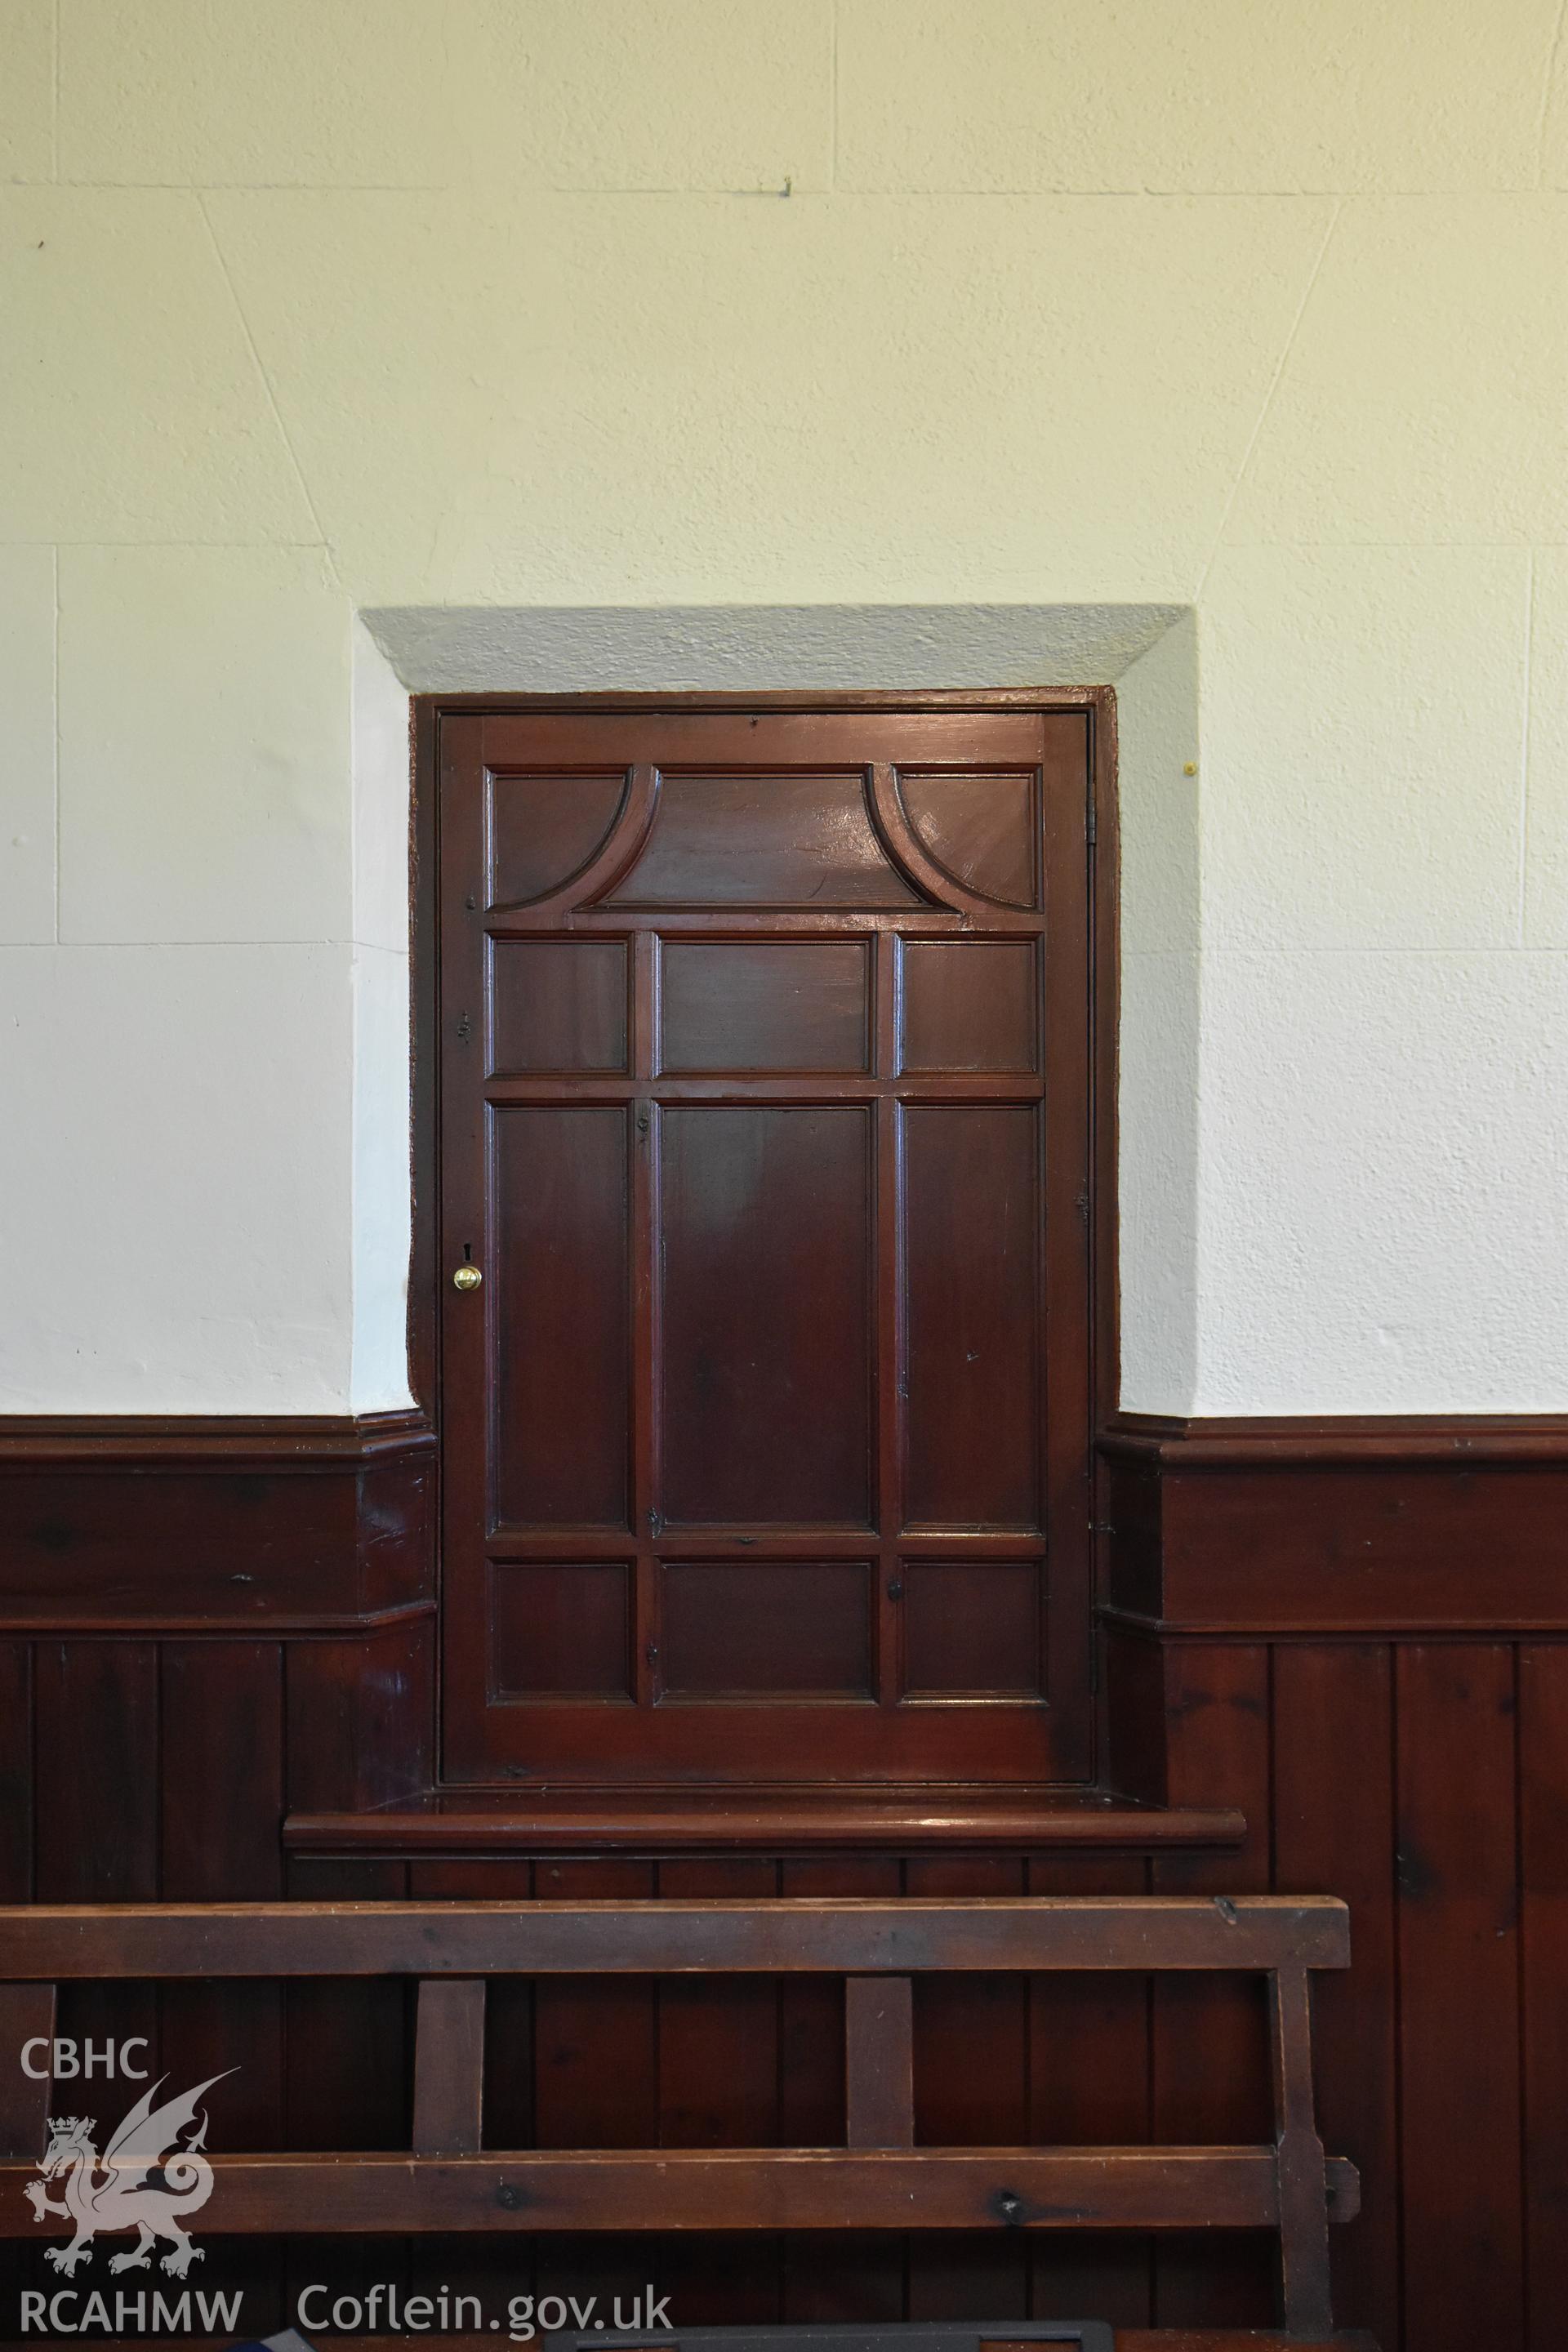 Detailed view of wooden cupboard, bench and panelling at the rear Hyssington Primitive Methodist Chapel, Hyssington, Churchstoke. Photographic survey conducted by Sue Fielding on 7th December 2018.